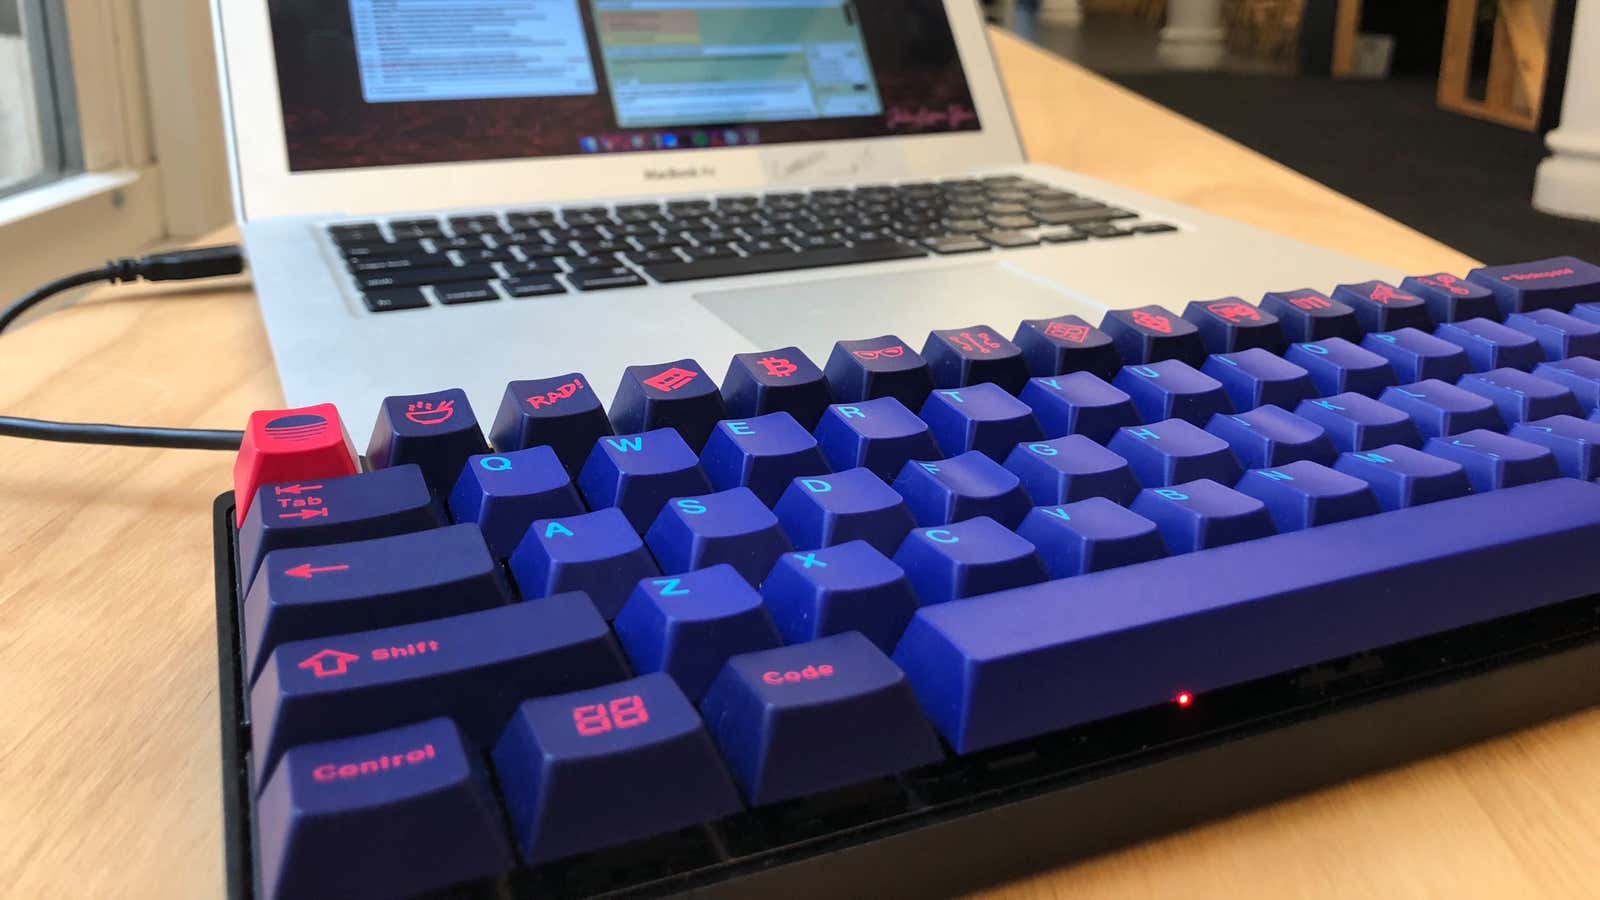 A good keyboard is all you need.